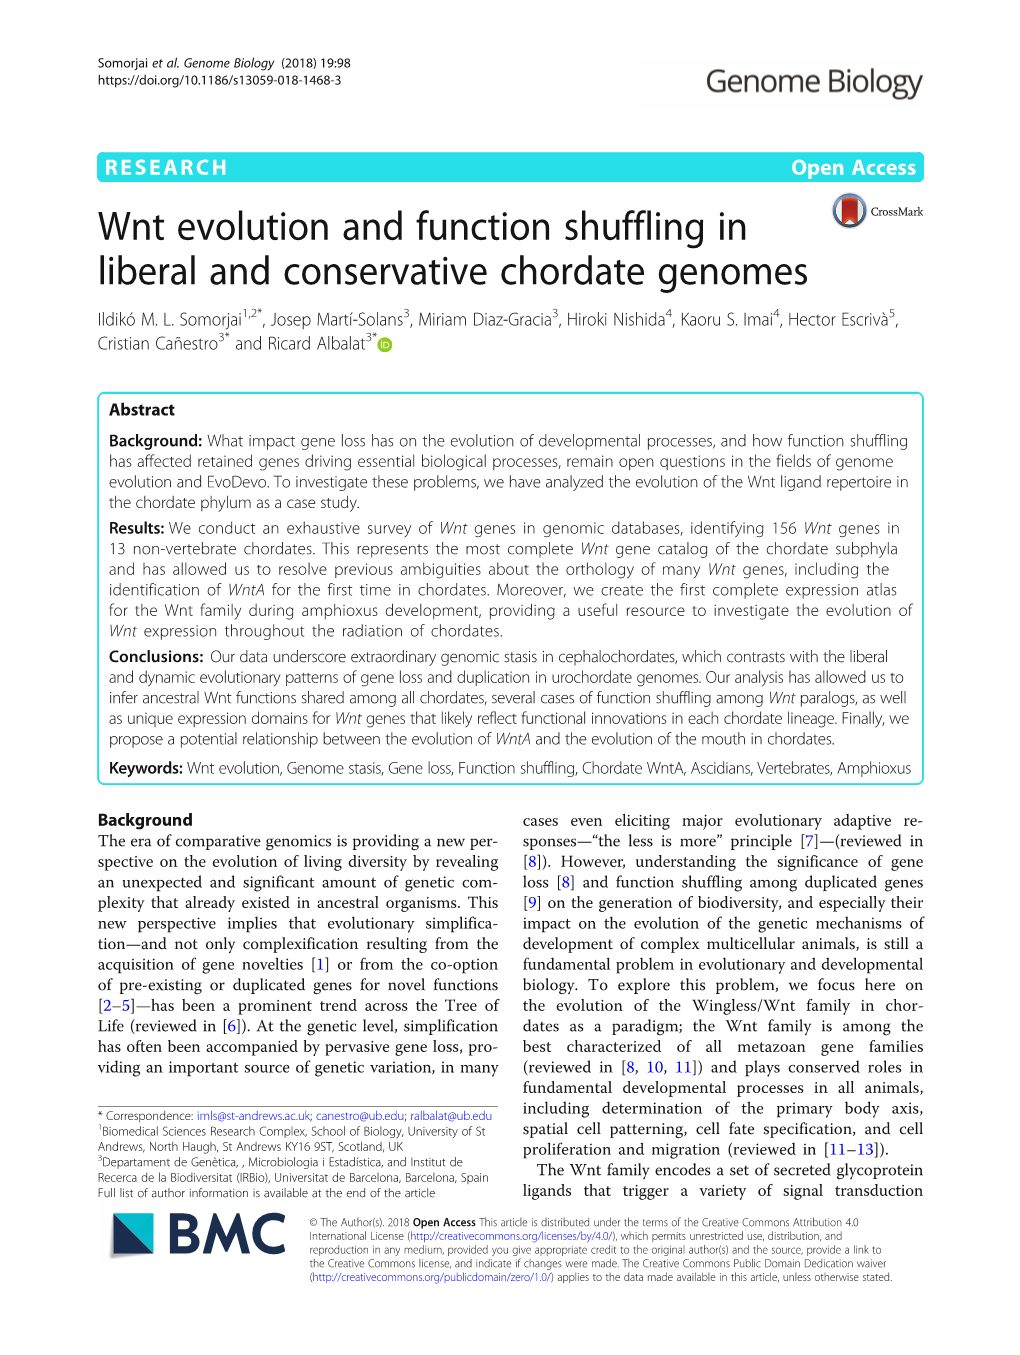 Wnt Evolution and Function Shuffling in Liberal and Conservative Chordate Genomes Ildikó M